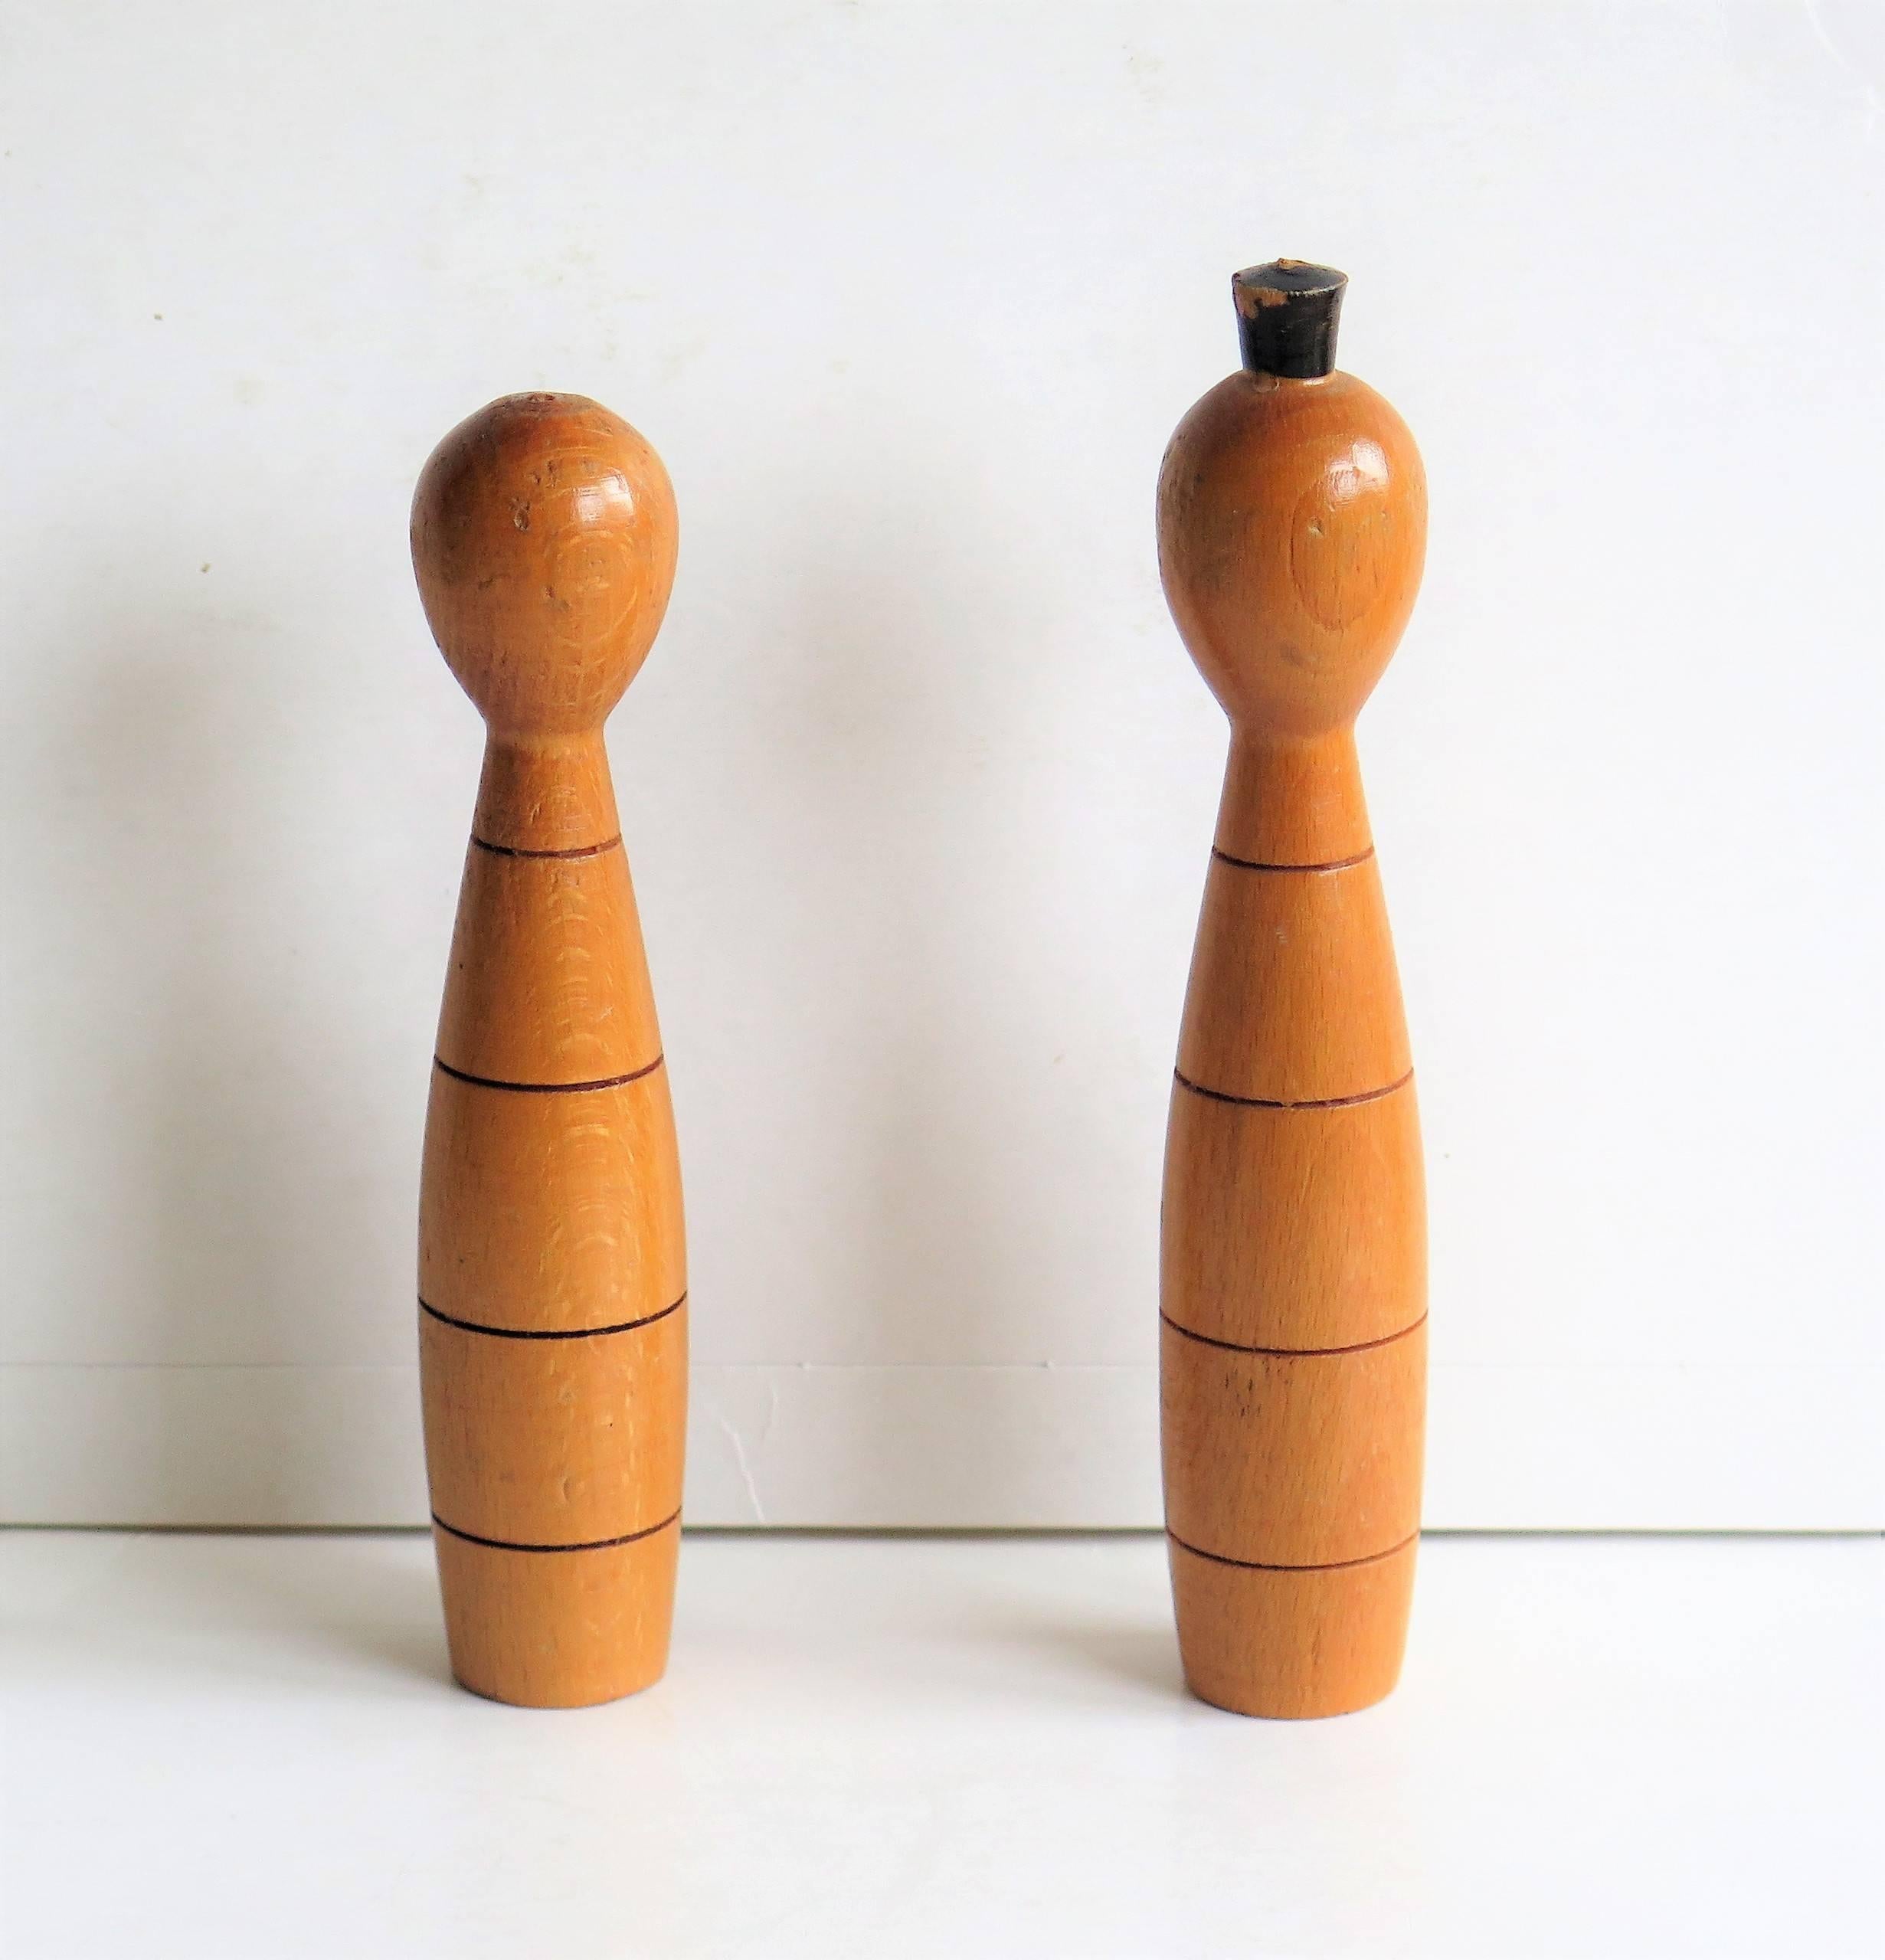 Turned Indoor Carpet Skittles Game, Nine-Pin, Two Balls and Stand, circa 1930s